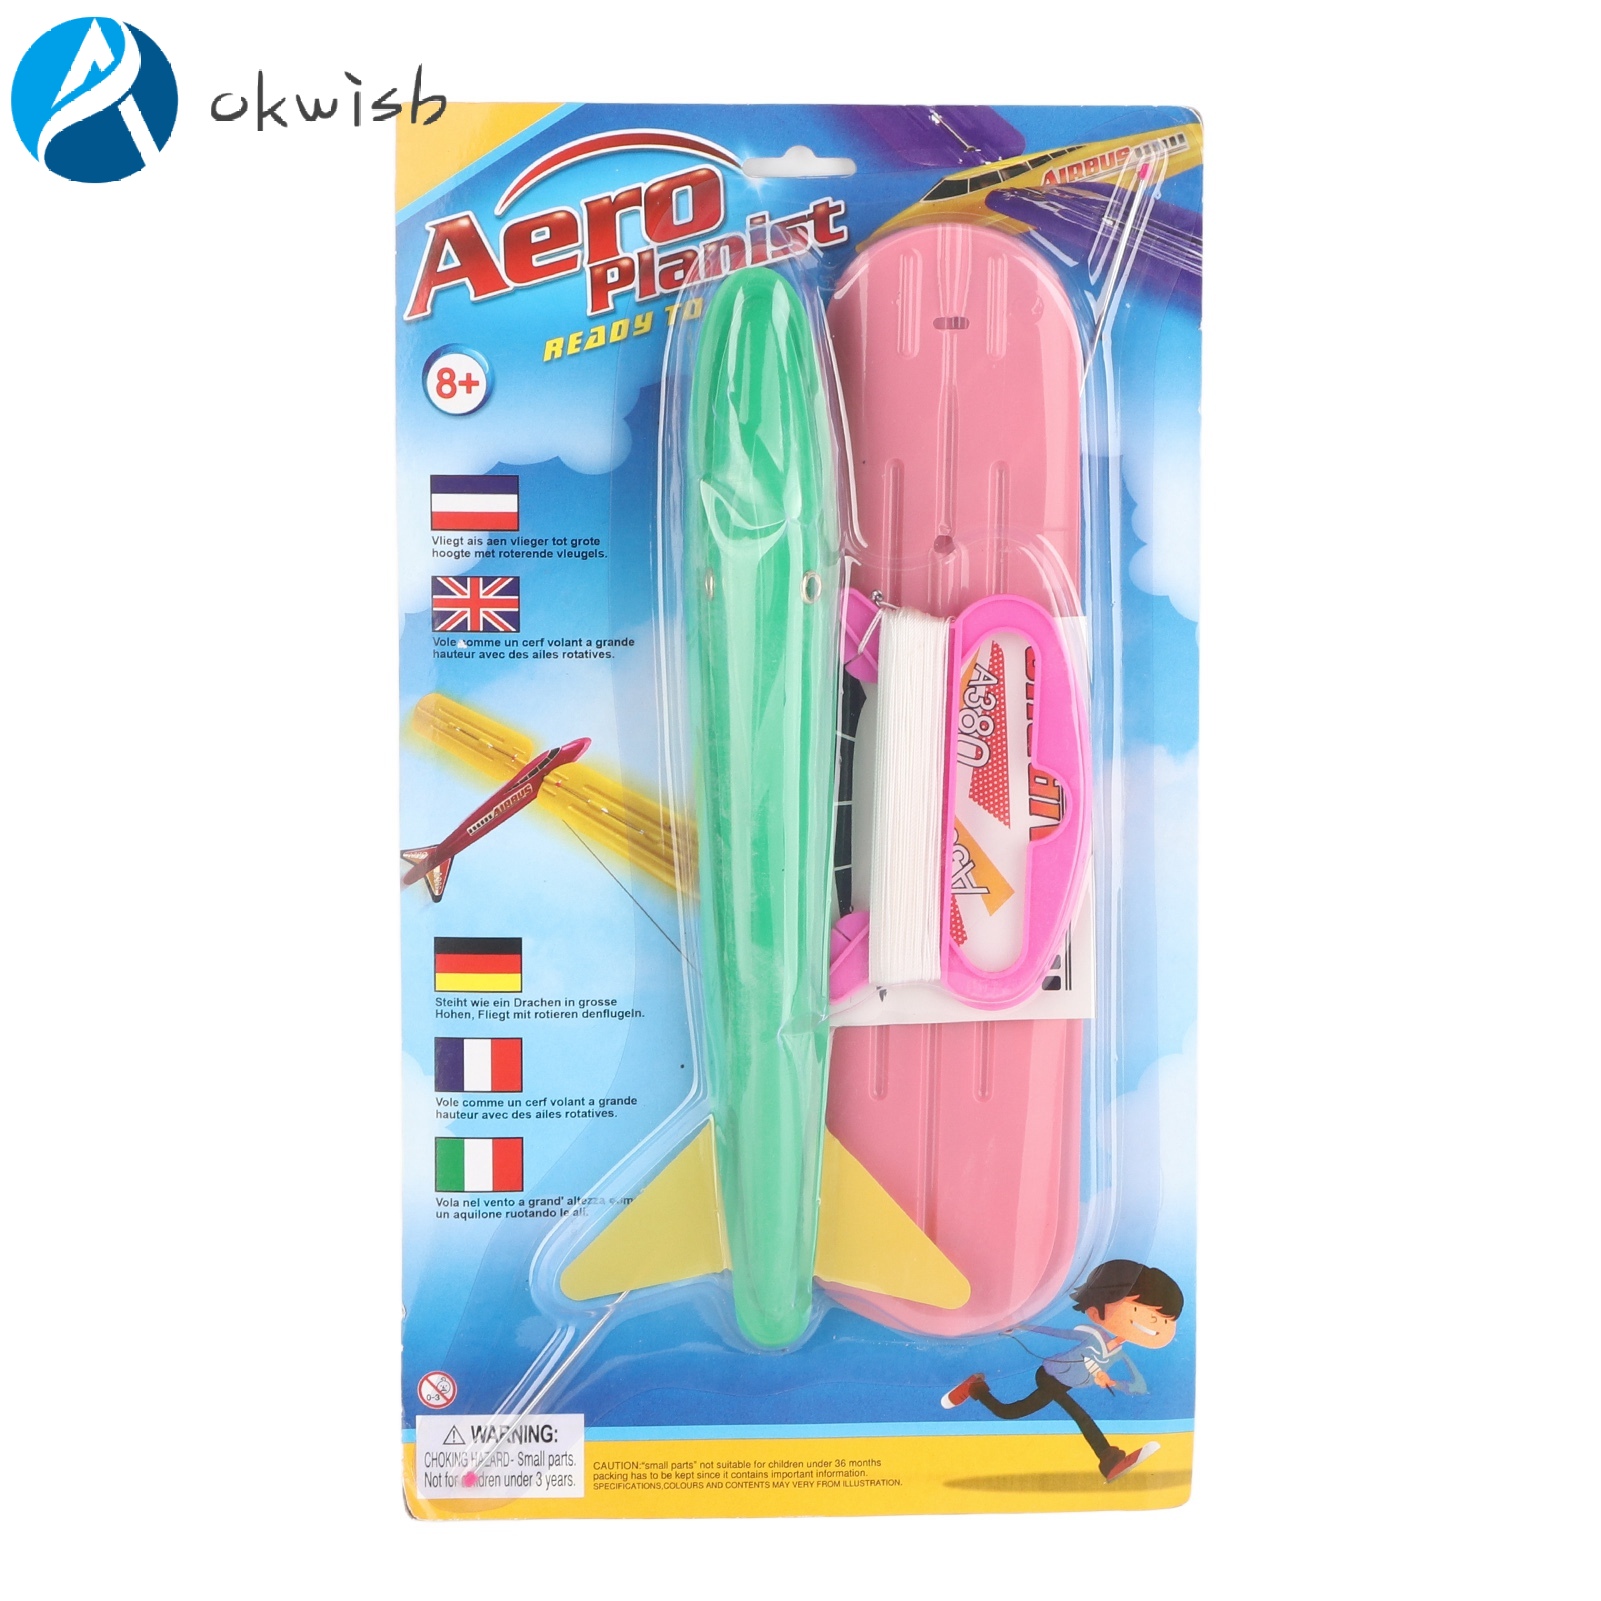 okwish Airplane Kite Toy Safe Durable PE PVC Easy Assembly Light Portable